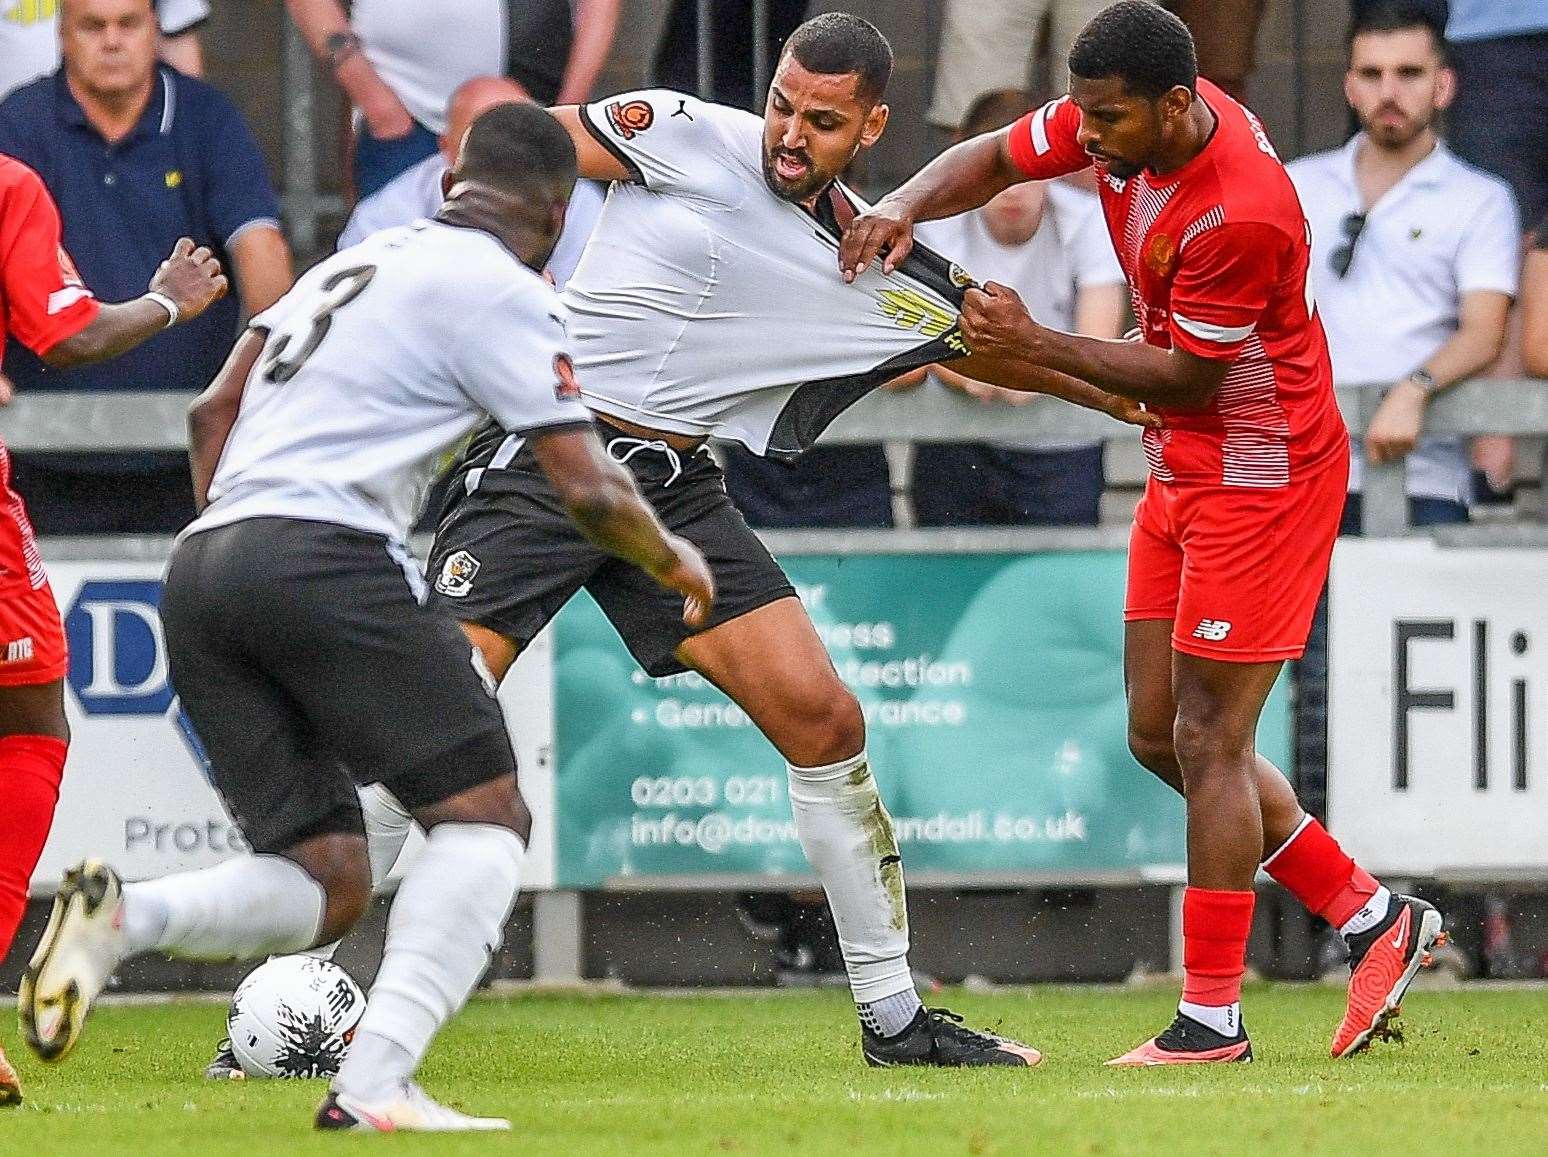 Dartford striker Lewis Manor is held back by Welling during last weekend’s FA Cup 3-2 exit. Picture: Dave Budden